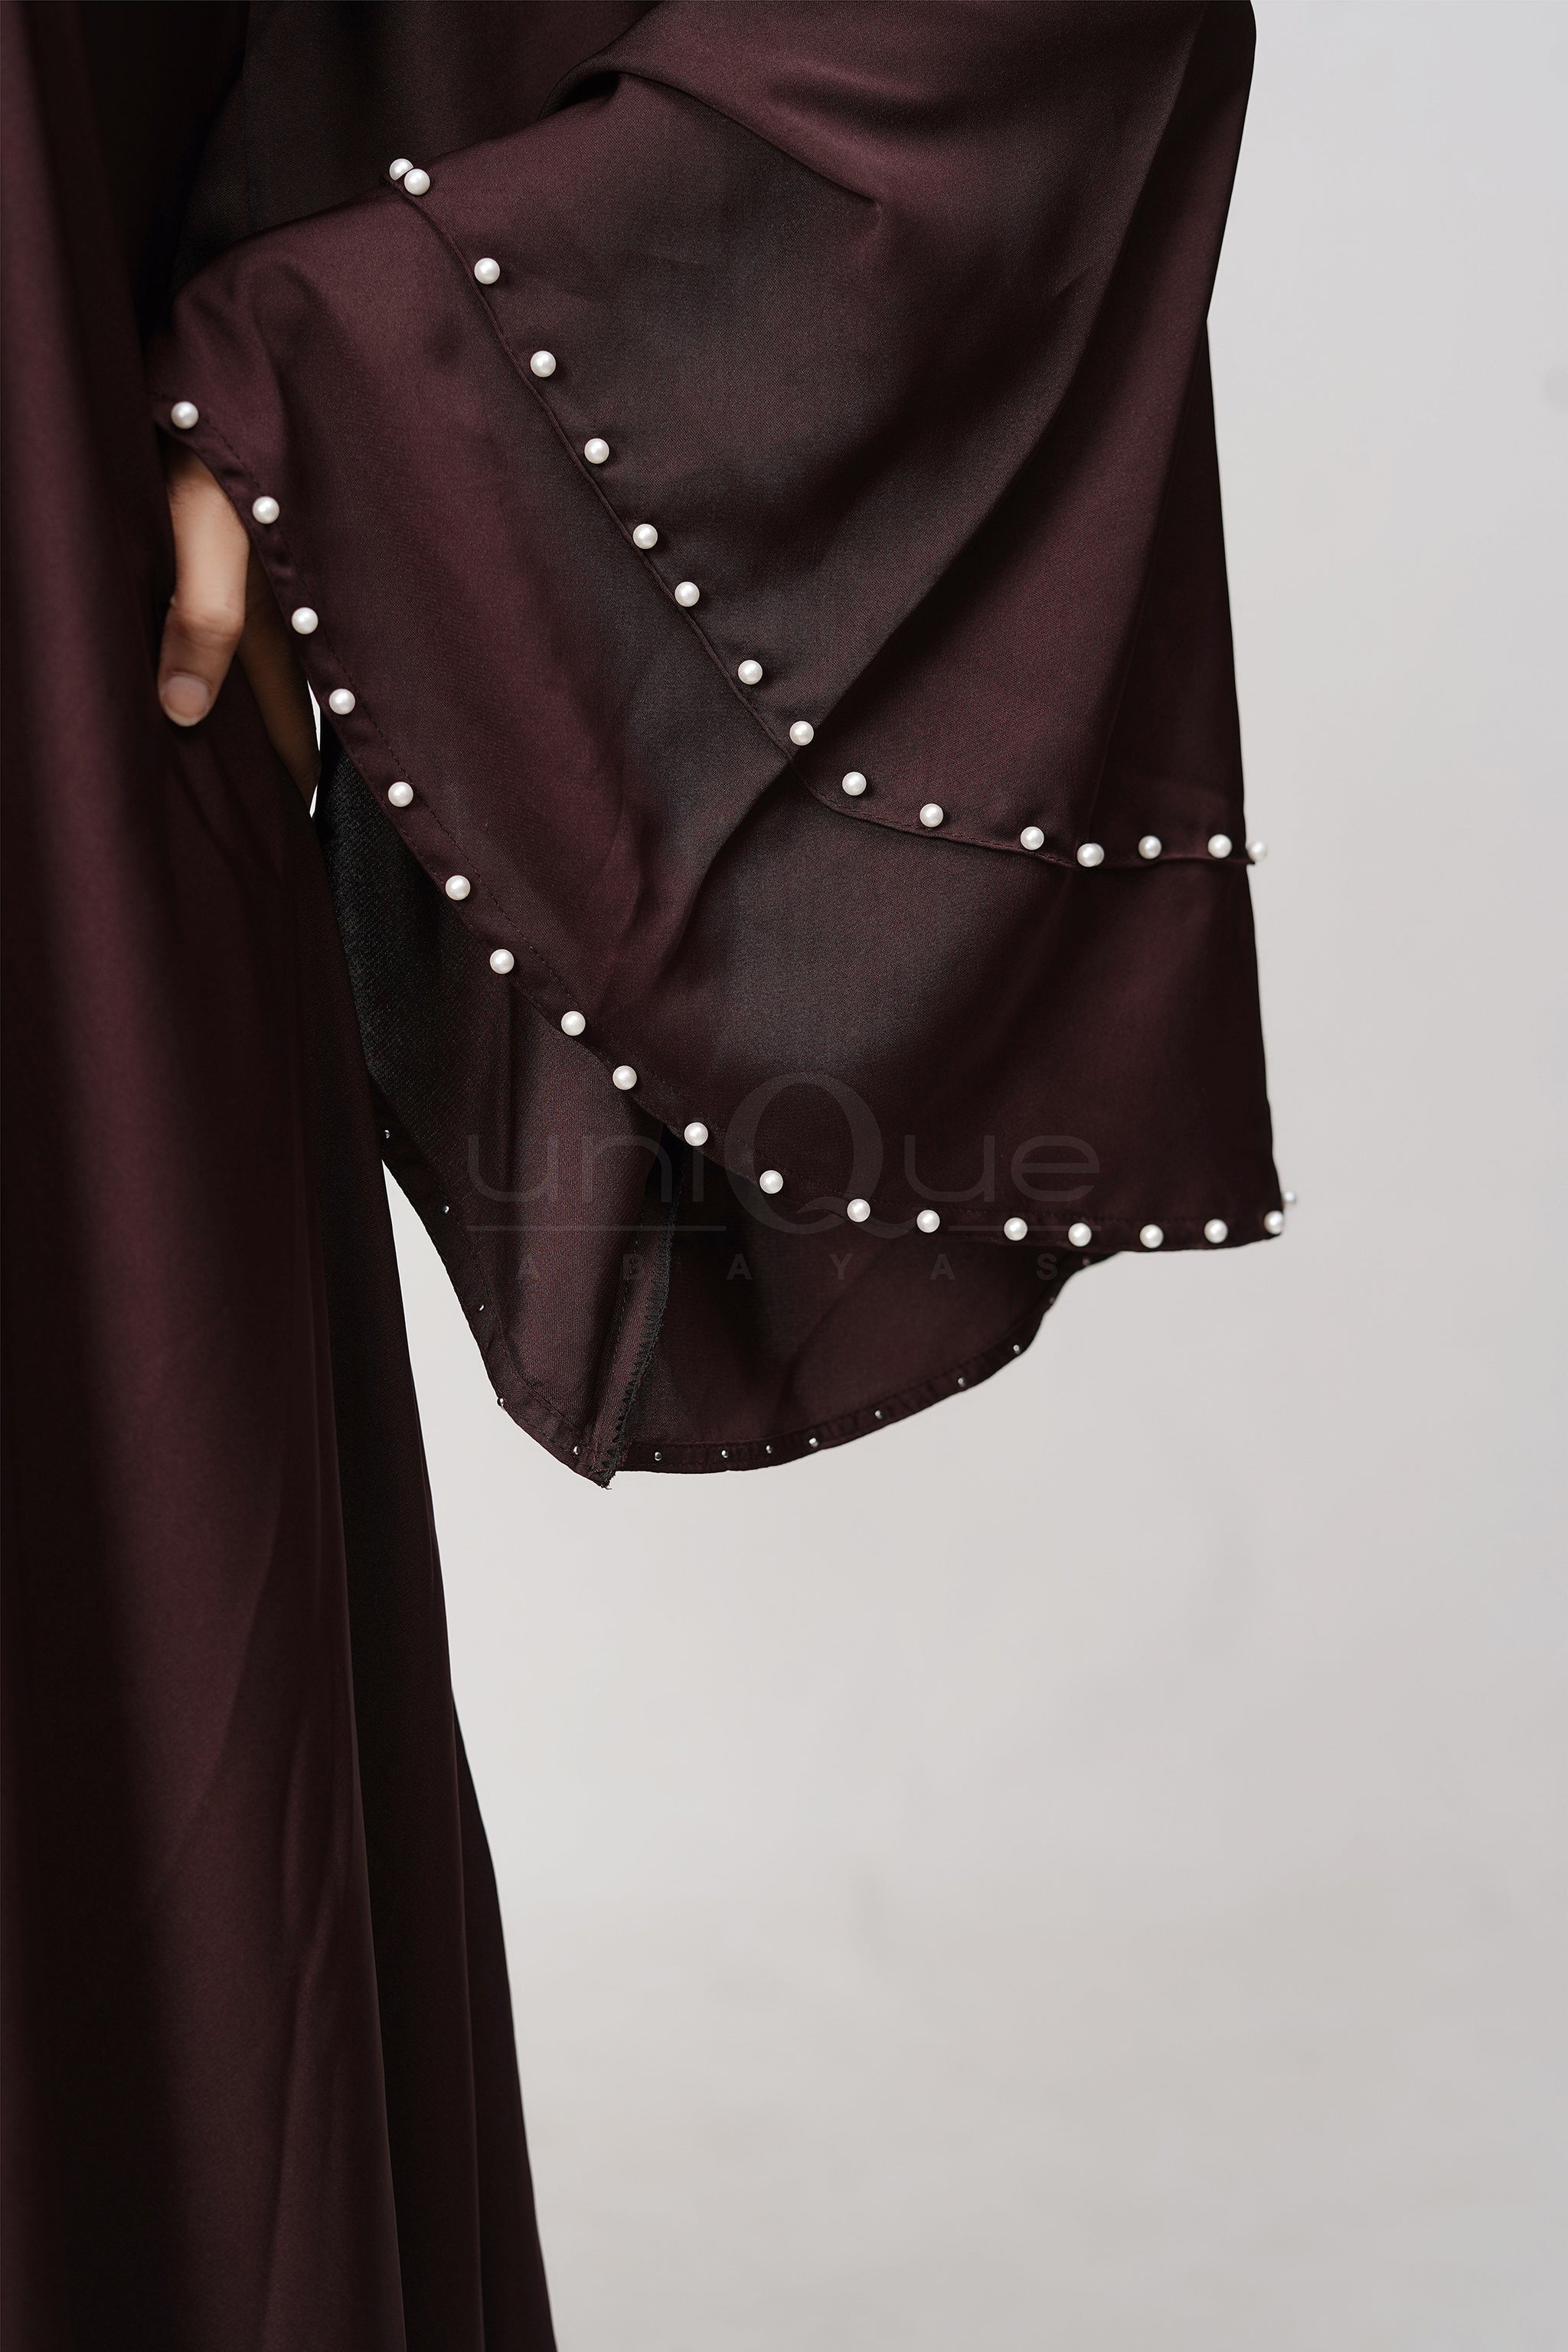 Pearl Umbrella Chocolate Abaya by Uniquewallart Abaya for Women, Front Side Close-Up Detailed